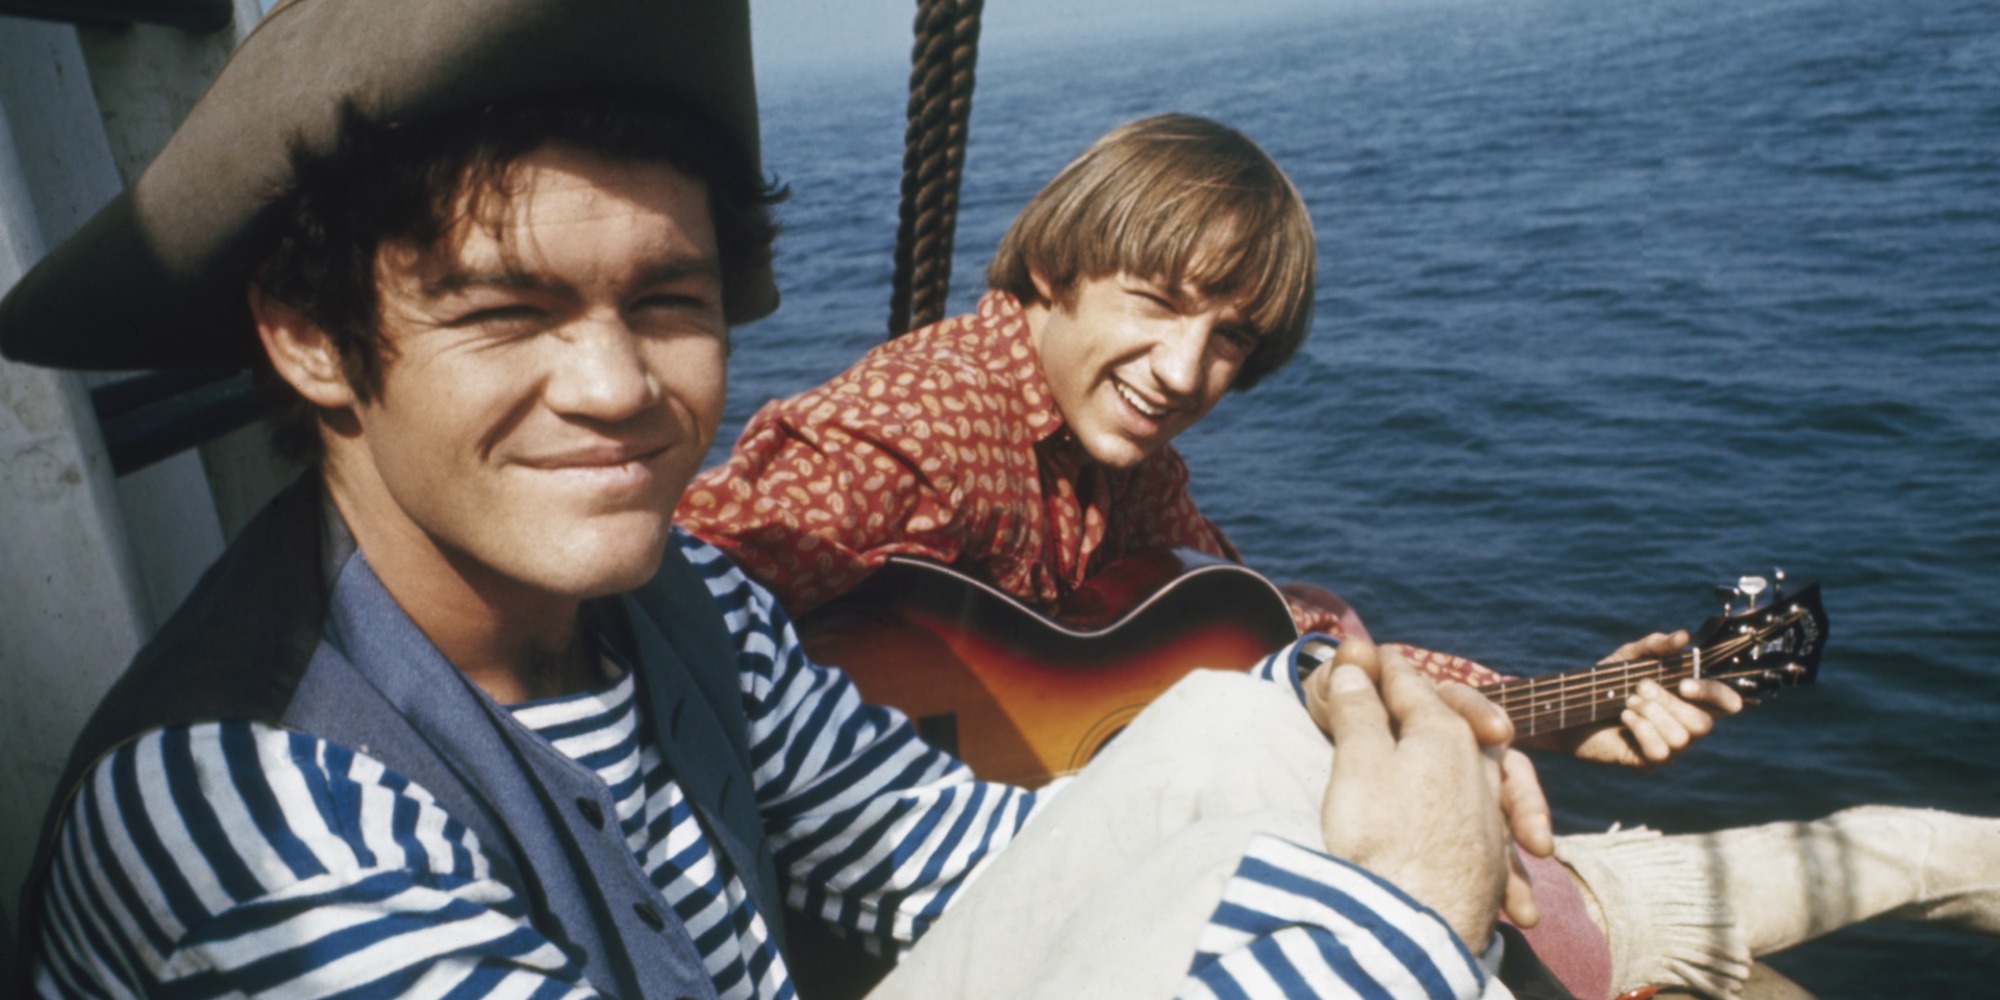 The Monkees members Micky Dolenz and Peter Tork on a boat.